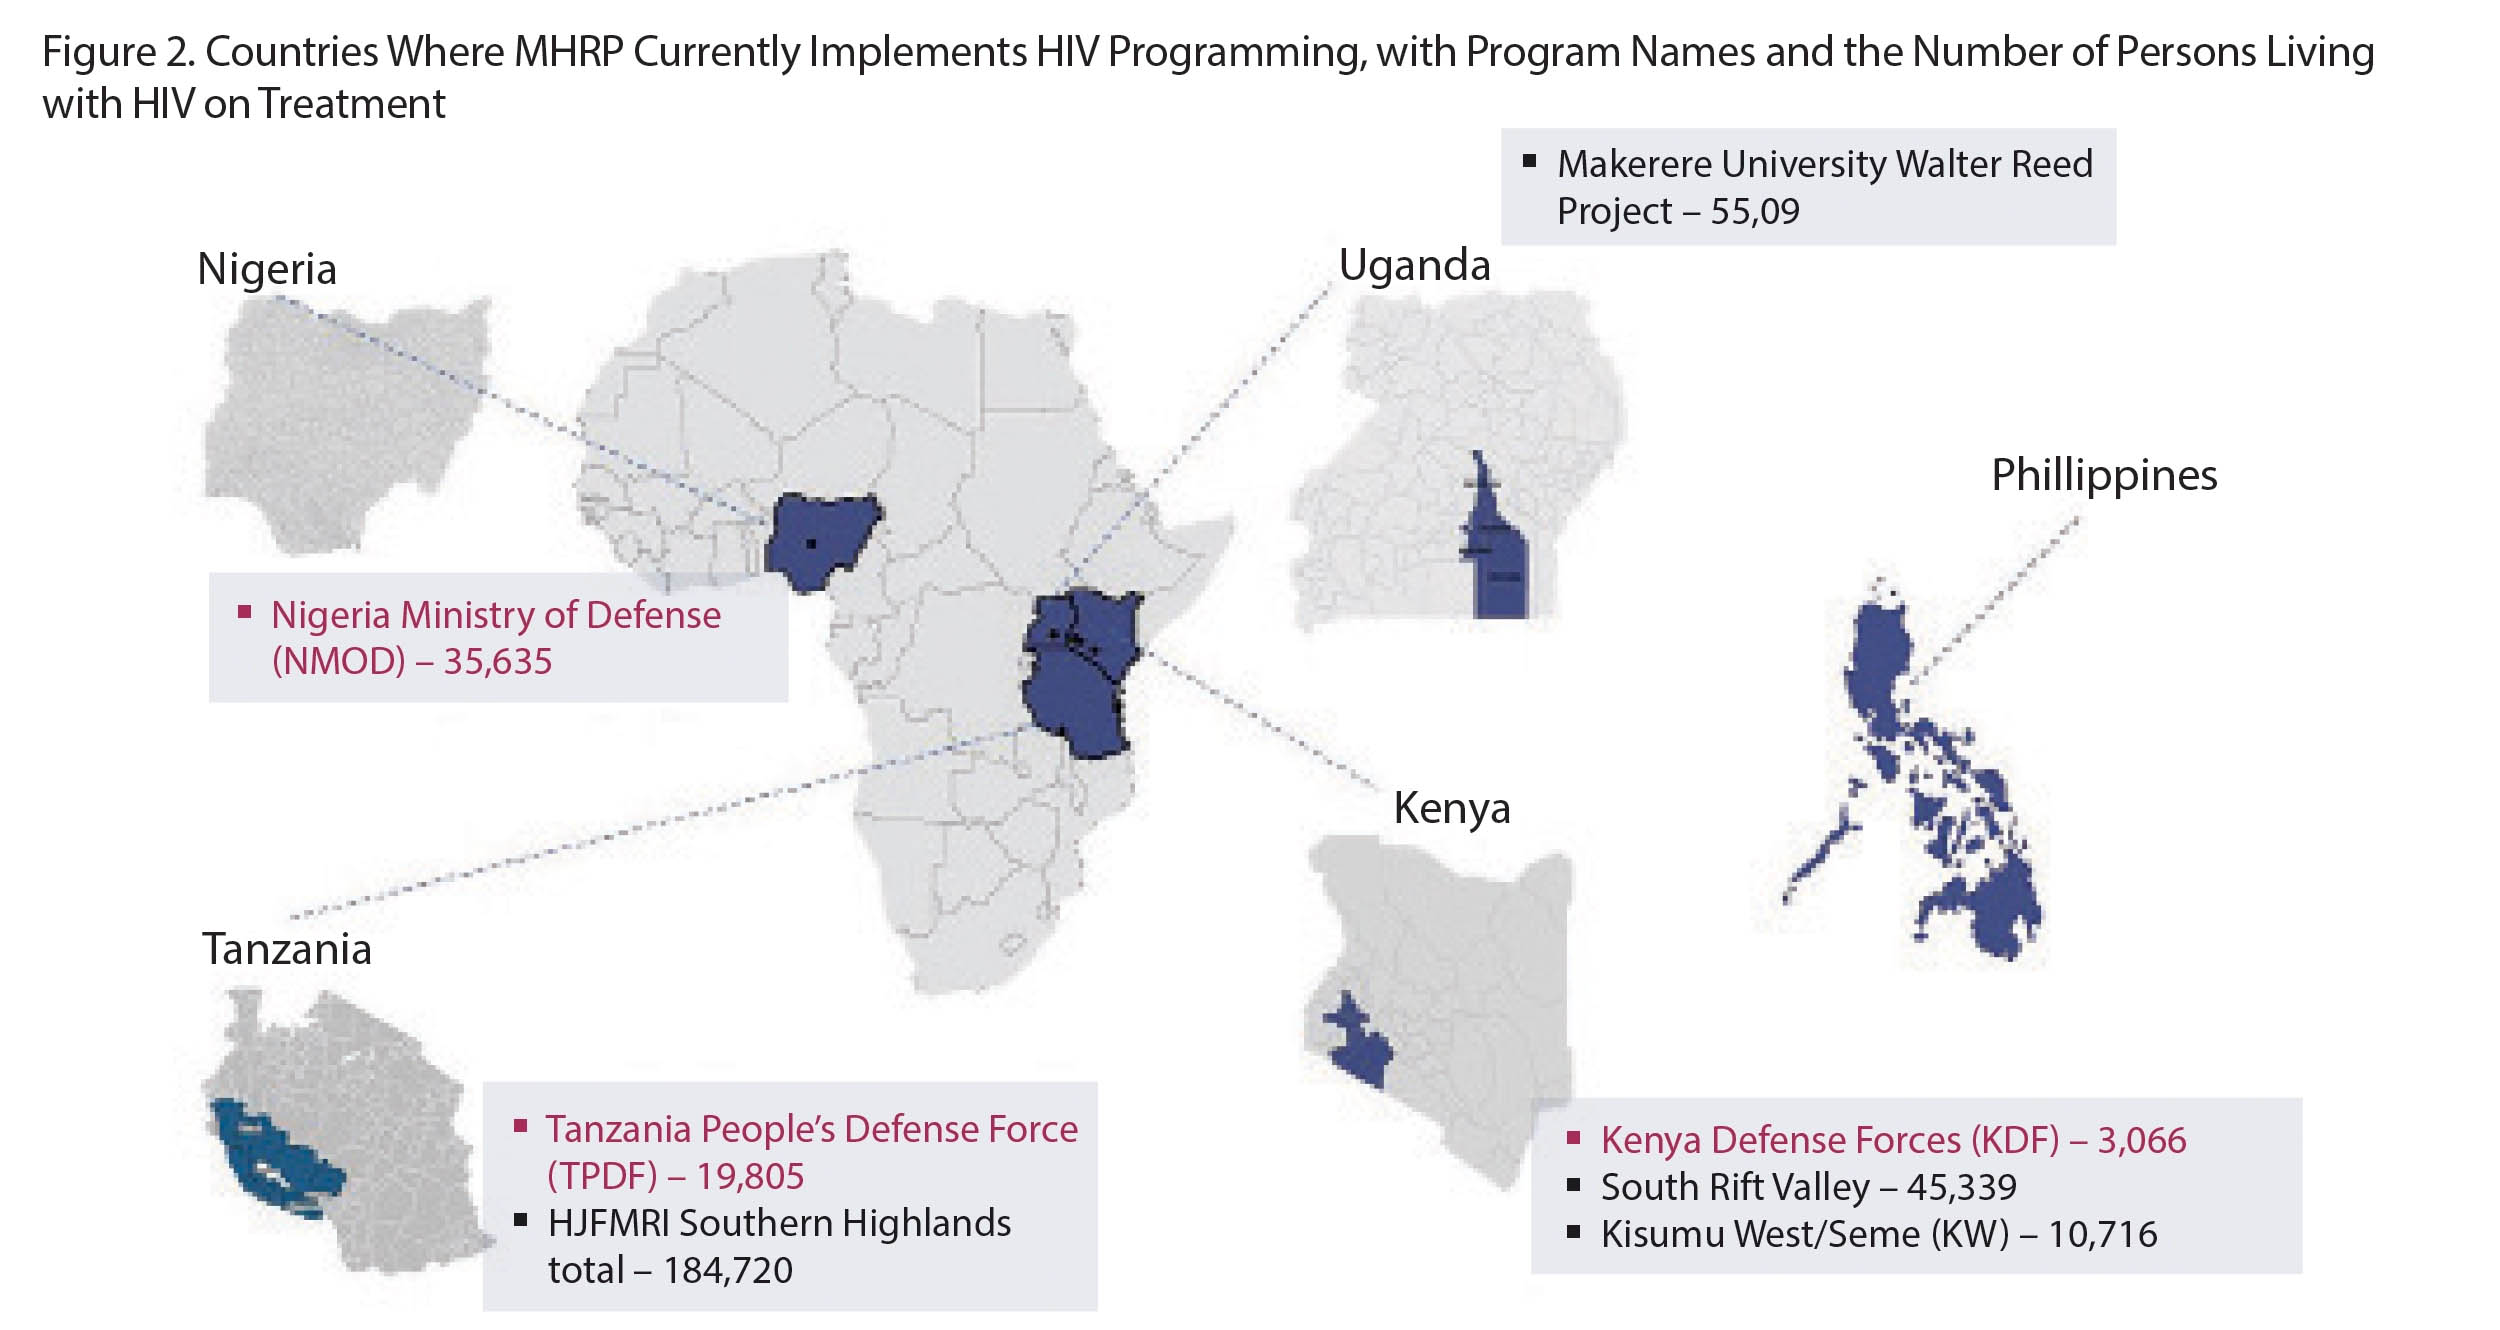 Figure 2. Countries Where MHRP Currently Implements HIV Programming, with Program Names and the Number of
Persons Living with HIV on Treatment